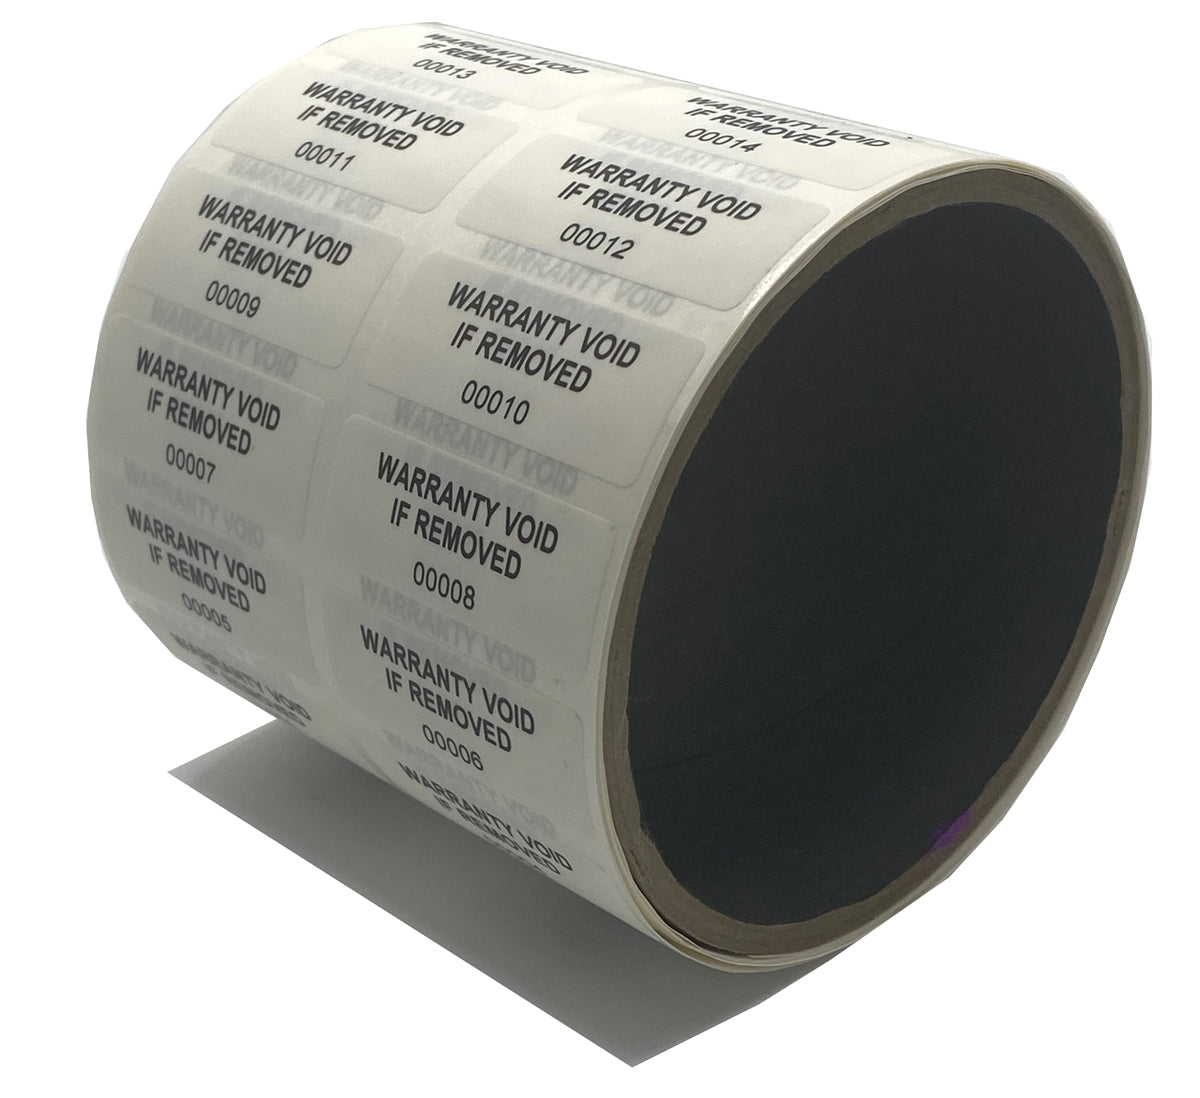 10,000 Tamper Evident White Non Residue Security Labels TamperGuard® Seal Sticker, Rectangle 1.5" x 0.6" (38mm x 15mm). Printed: Warranty Void if Removed + Serialized